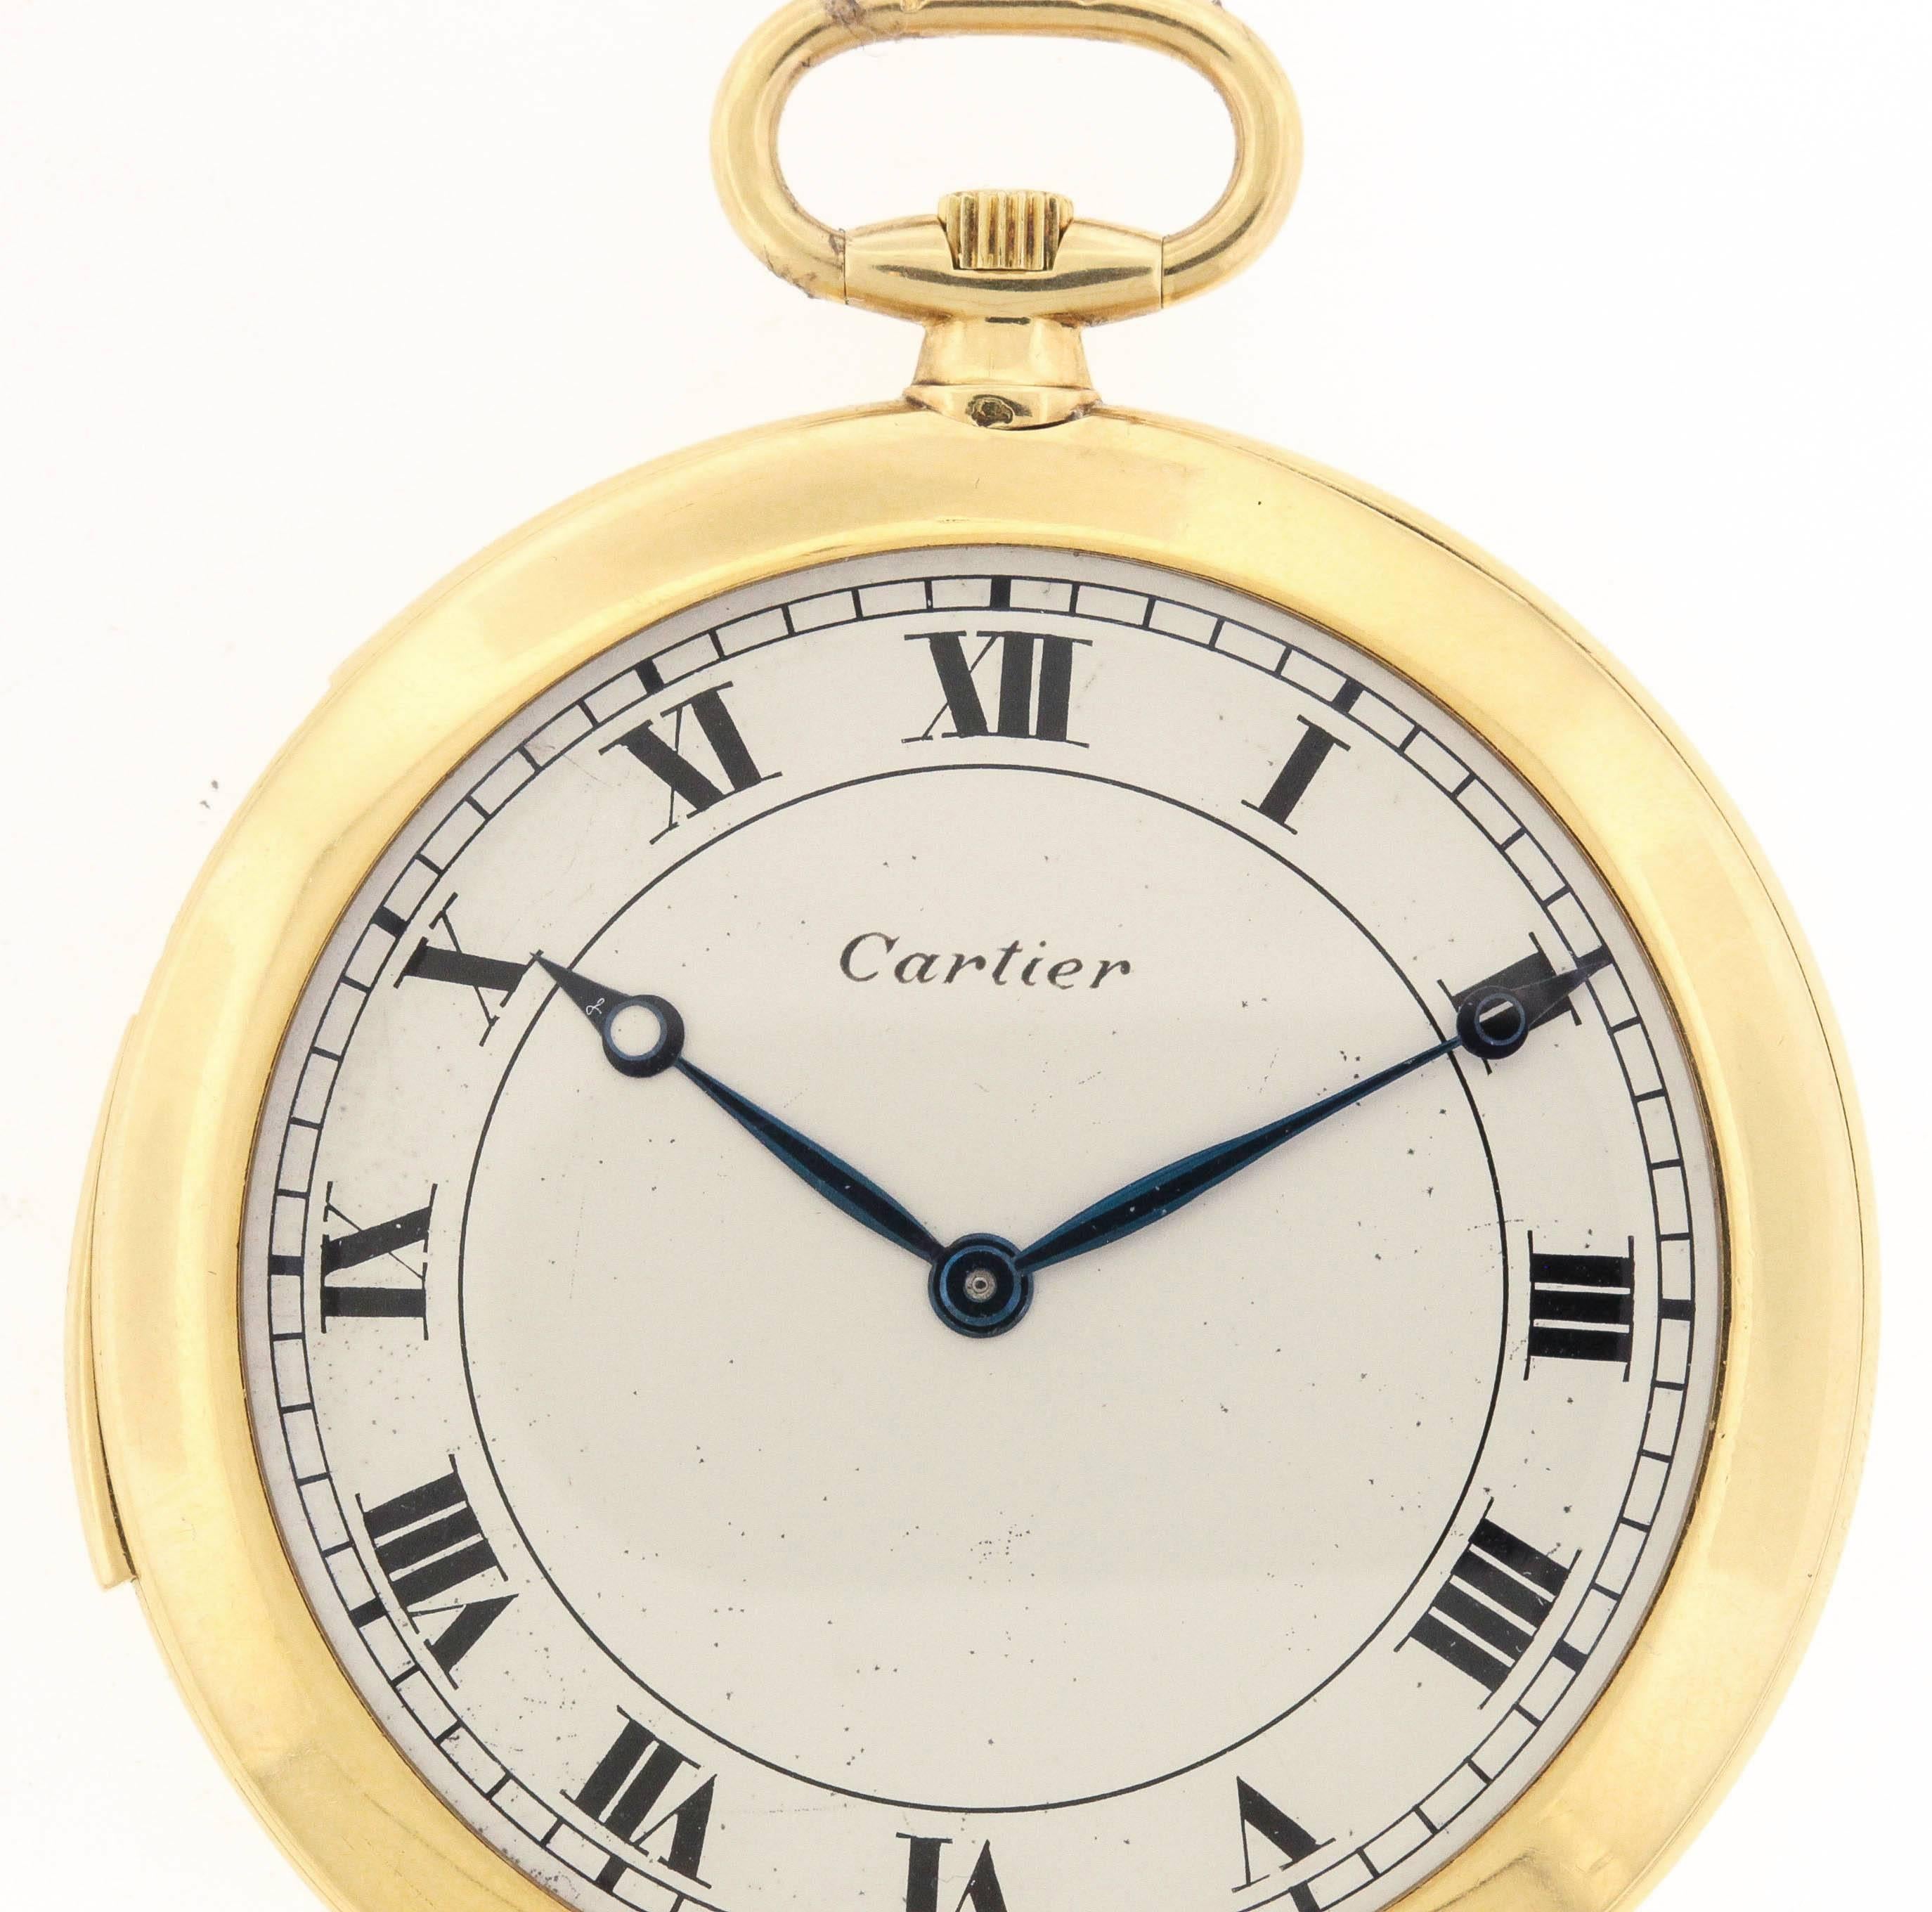 Rare Art Deco open face Cartier, very thin and elegant, minute-repeating, 18K yellow gold dress pocket watch.  The 48.5 mm case has a polished knife edge,  the interior of the back cover with engraved presentation inscription dated 1927.  The matte